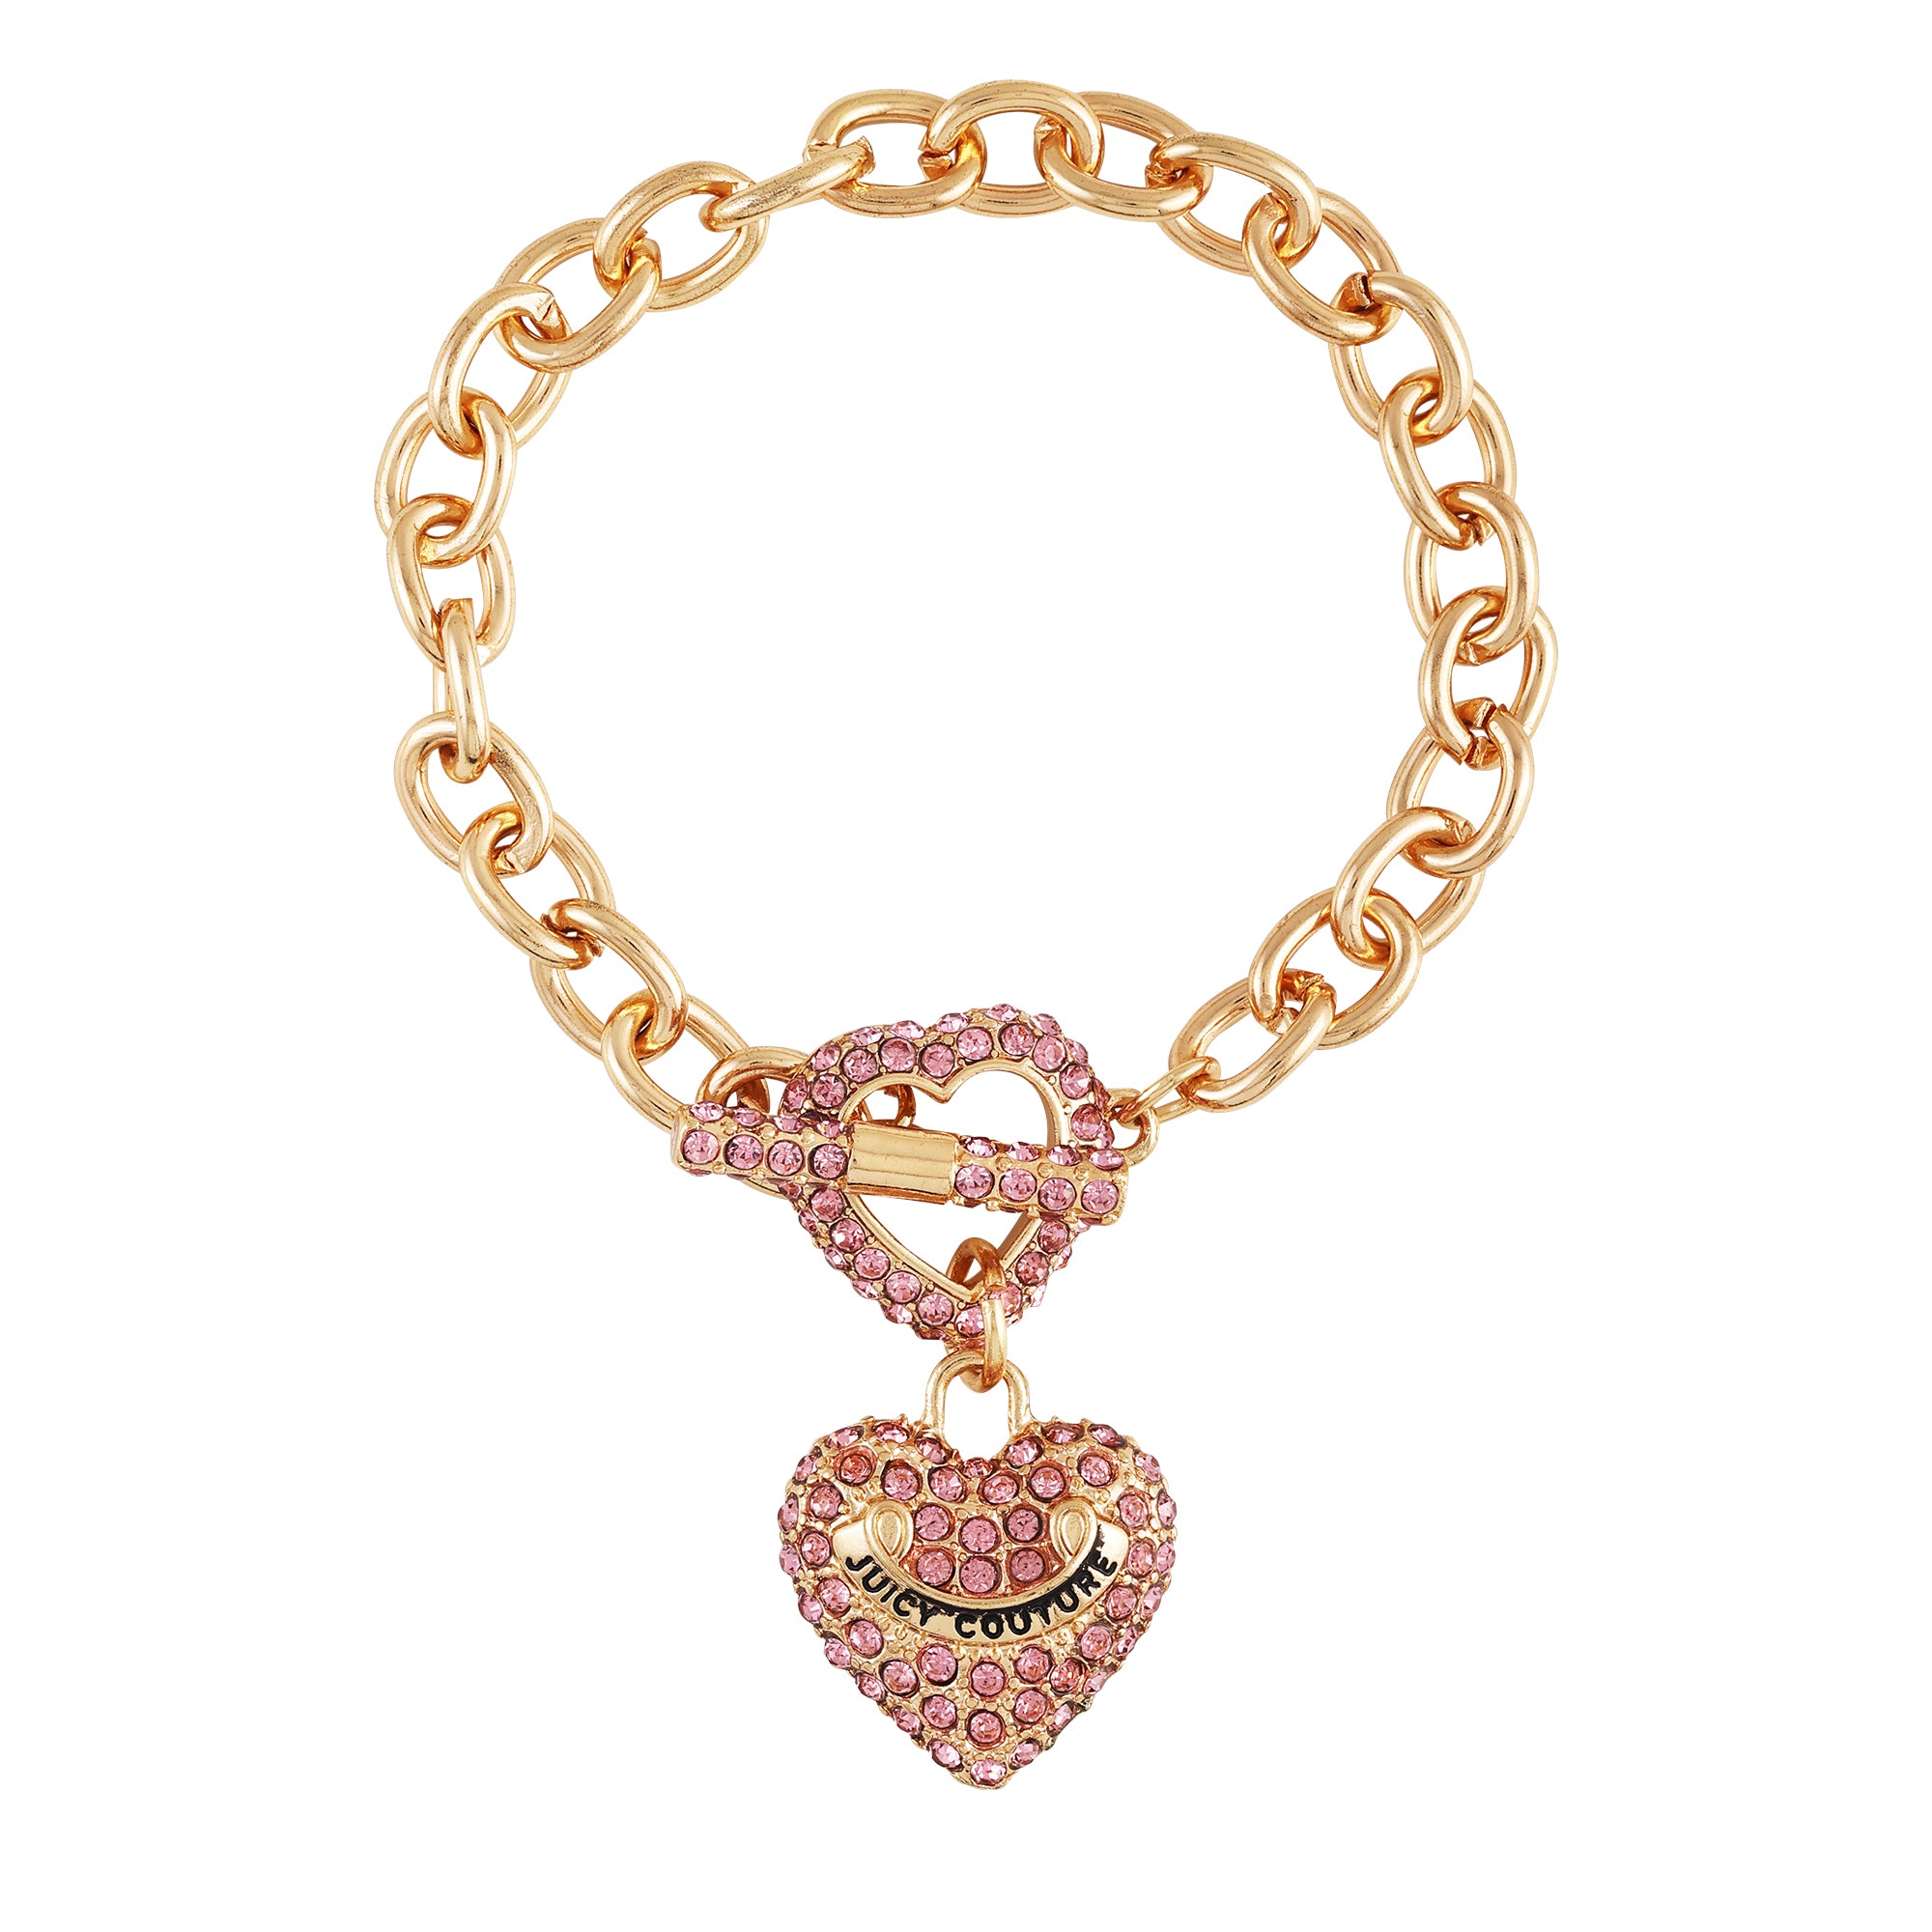 Juicy Couture charm necklace  Juicy couture charm necklace, Juicy